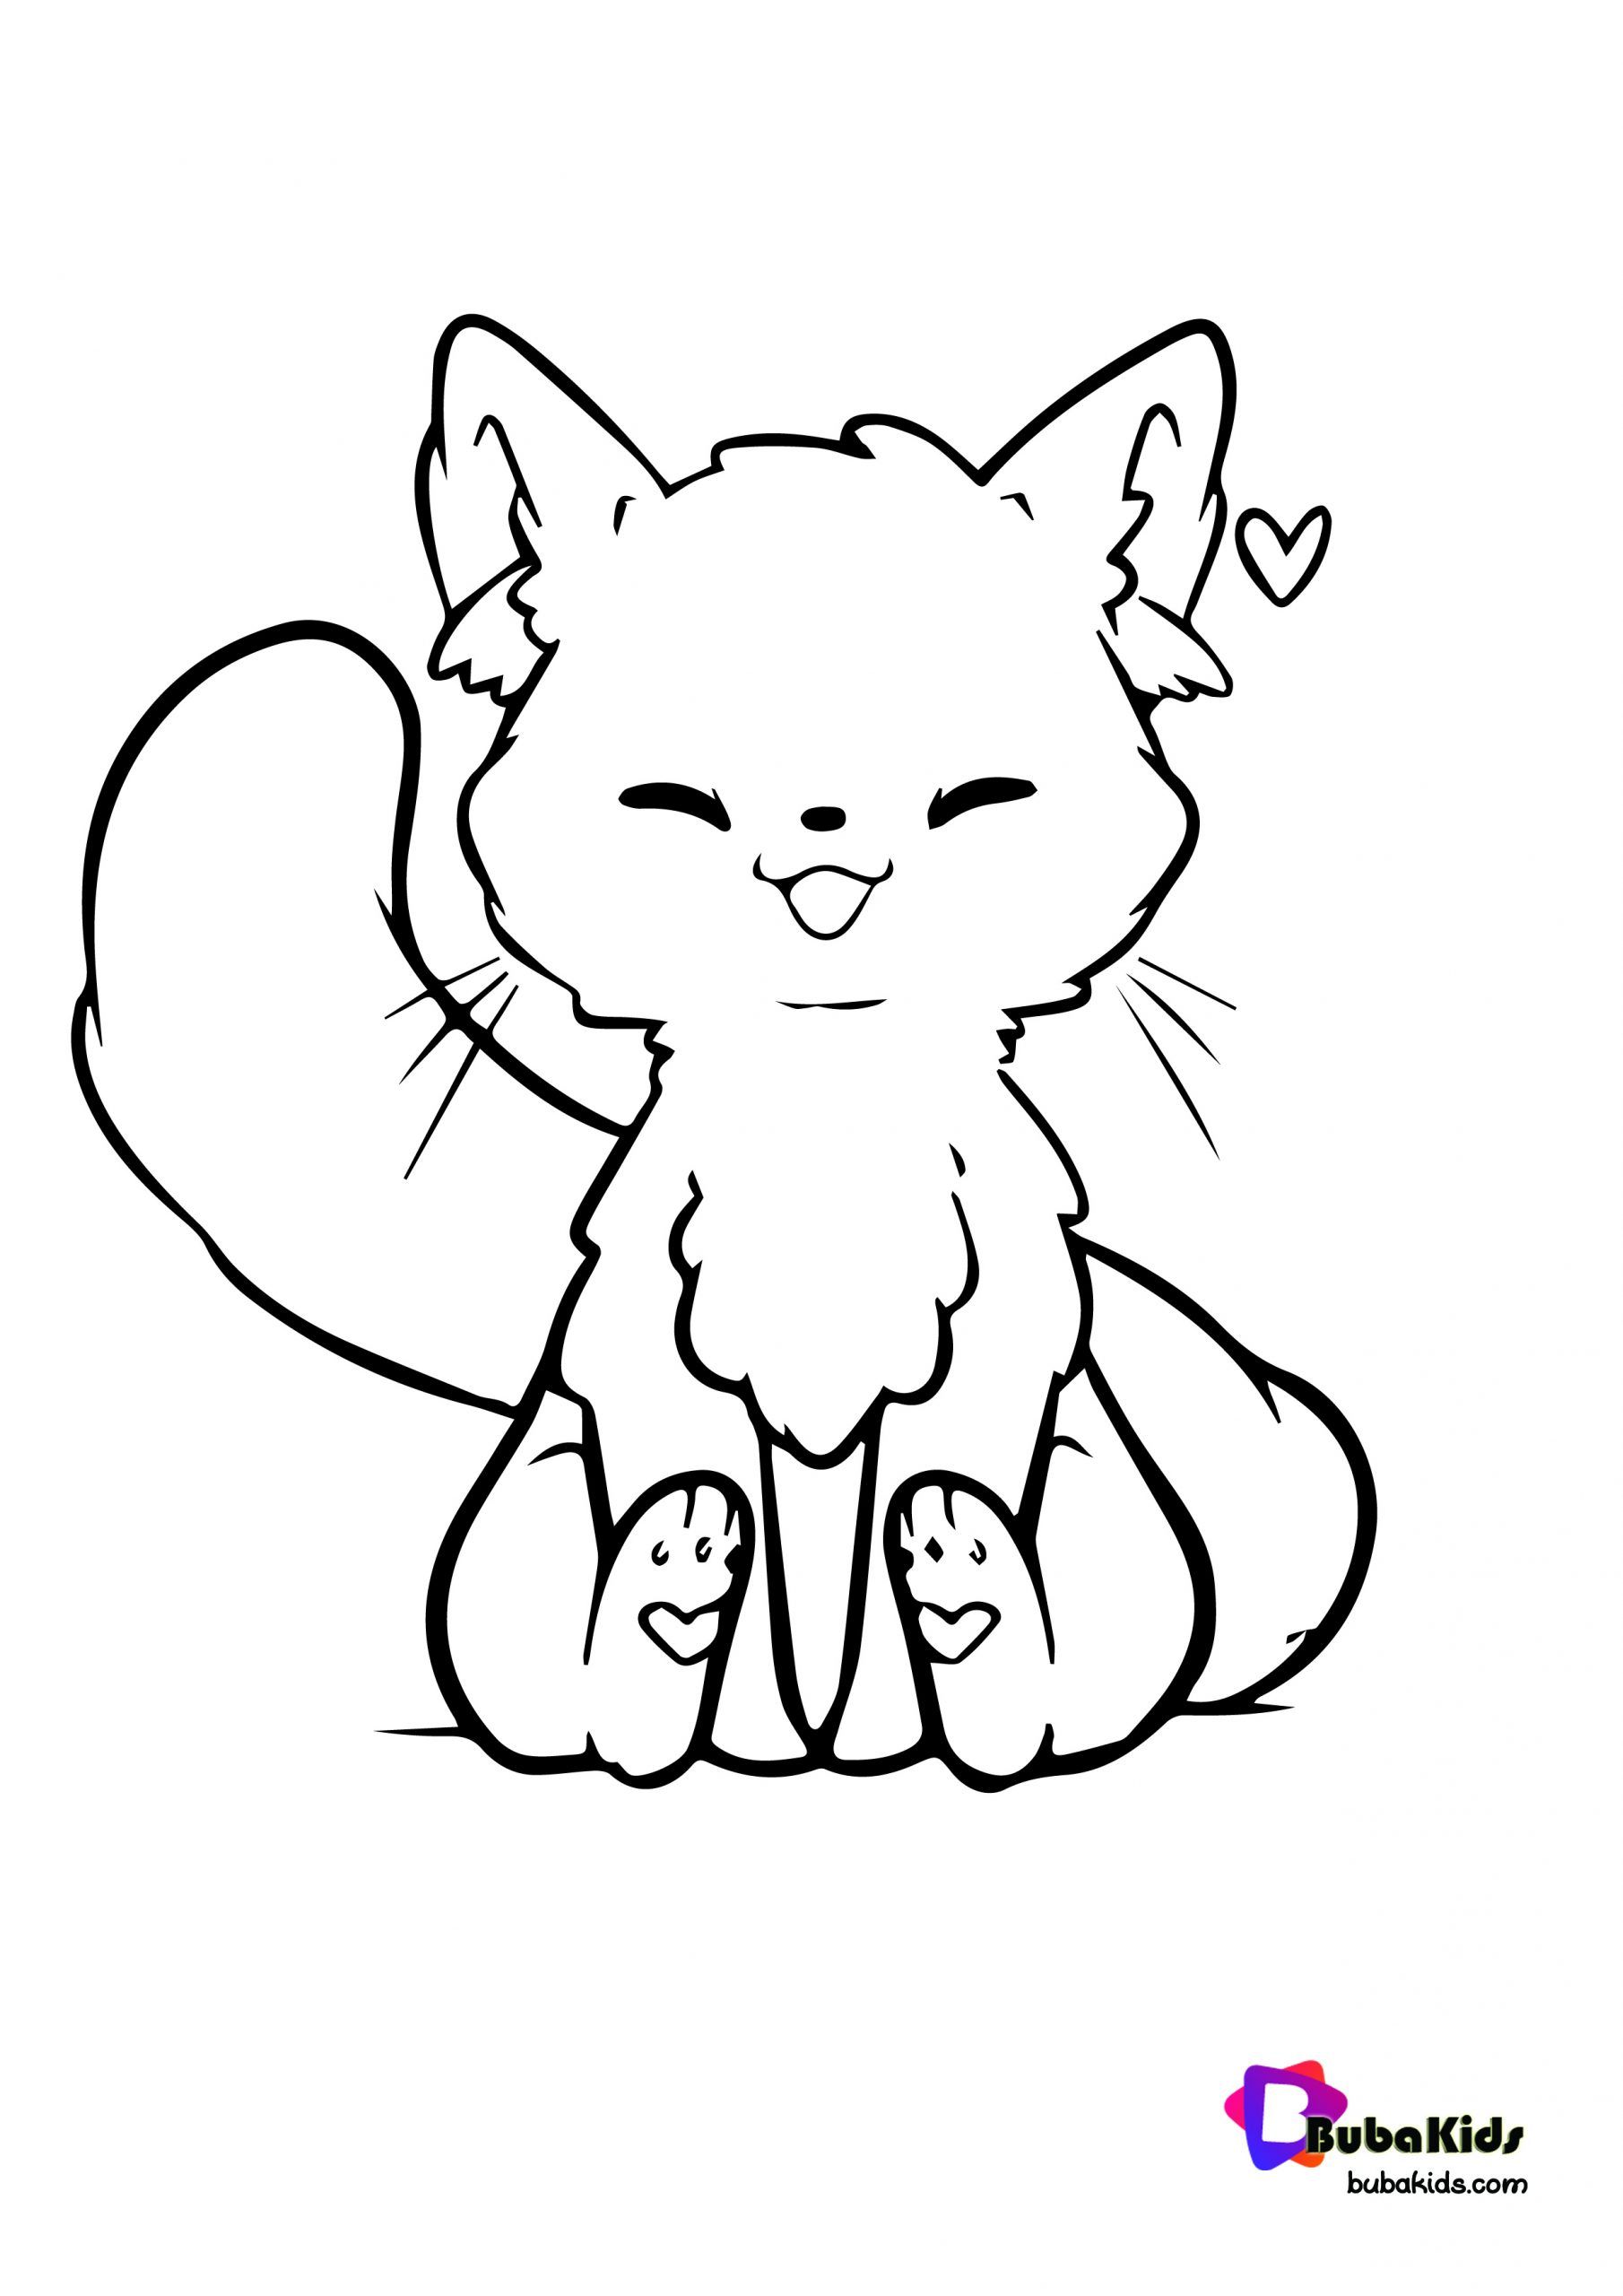 Kawaii Cat Coloring Page Bubakids Collection of animal coloring pages for  teenage printable that you can download … | Cat colors, Cat coloring page, Coloring  pages